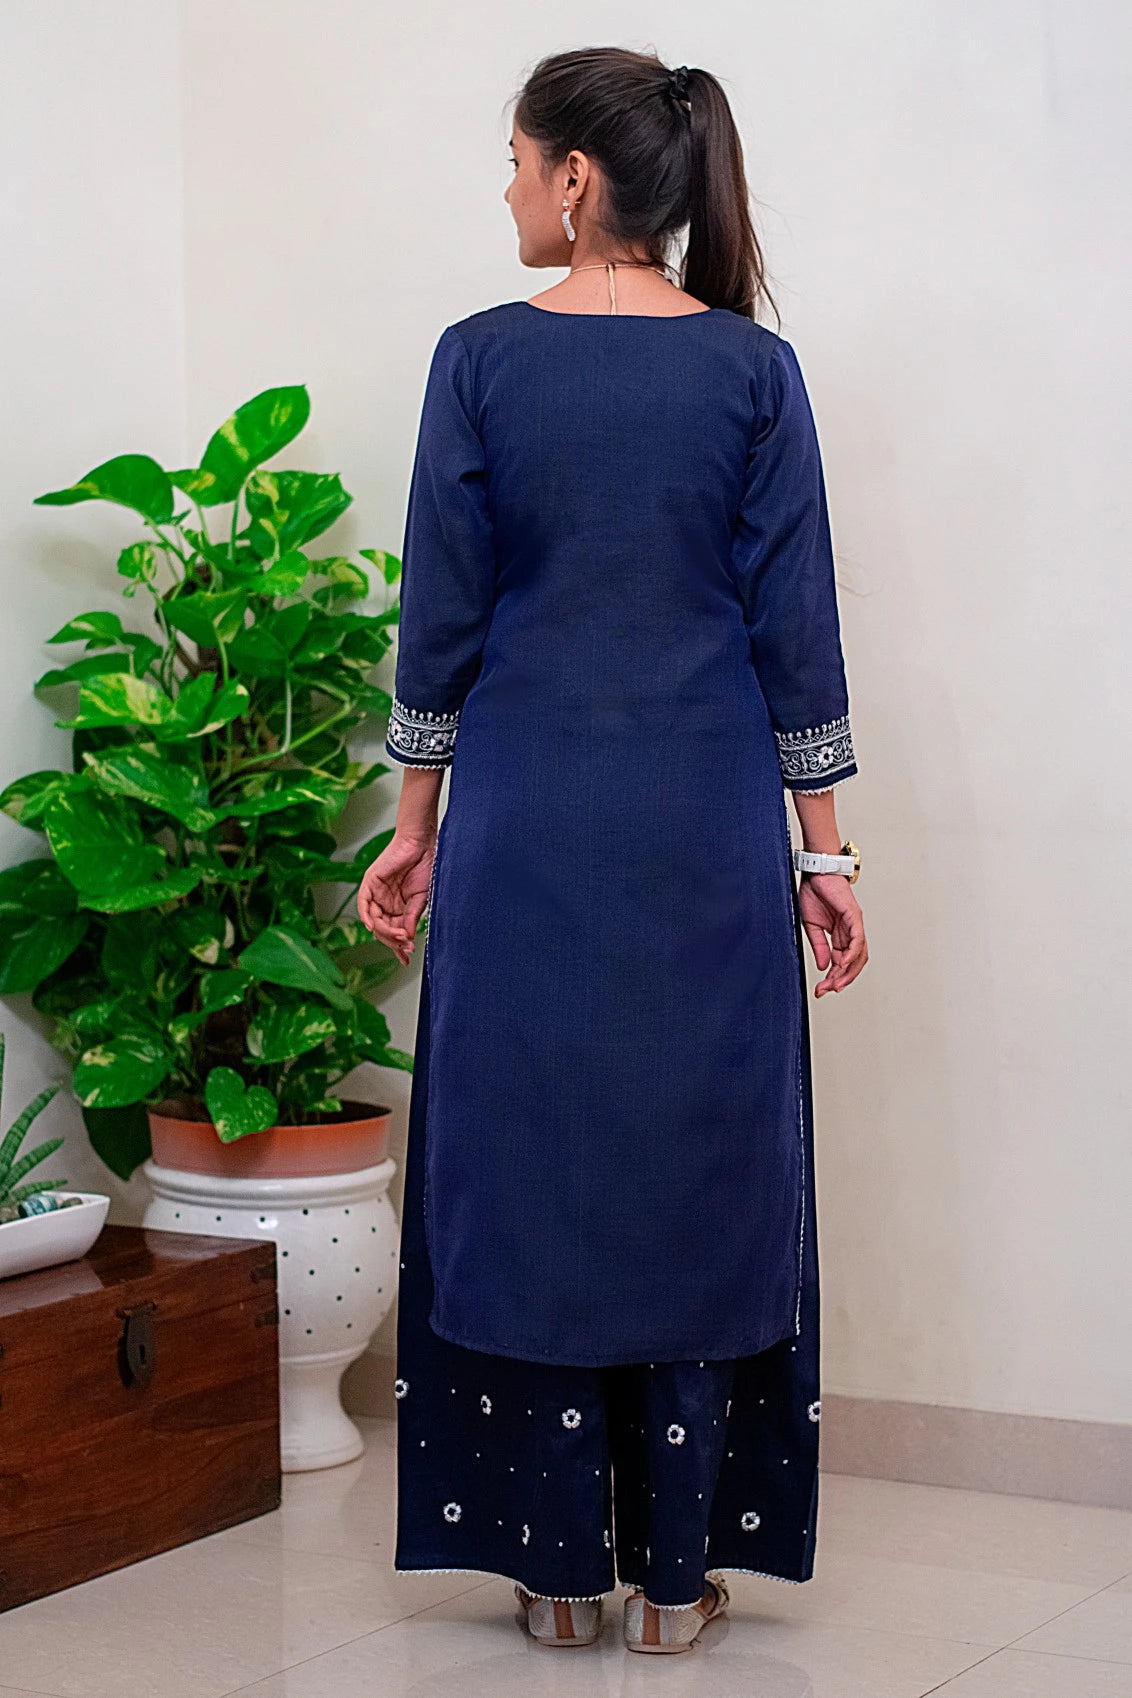 A young woman wearing a blue kurta and a printed blue dupatta, showcasing a contemporary take on traditional Indian fashion.